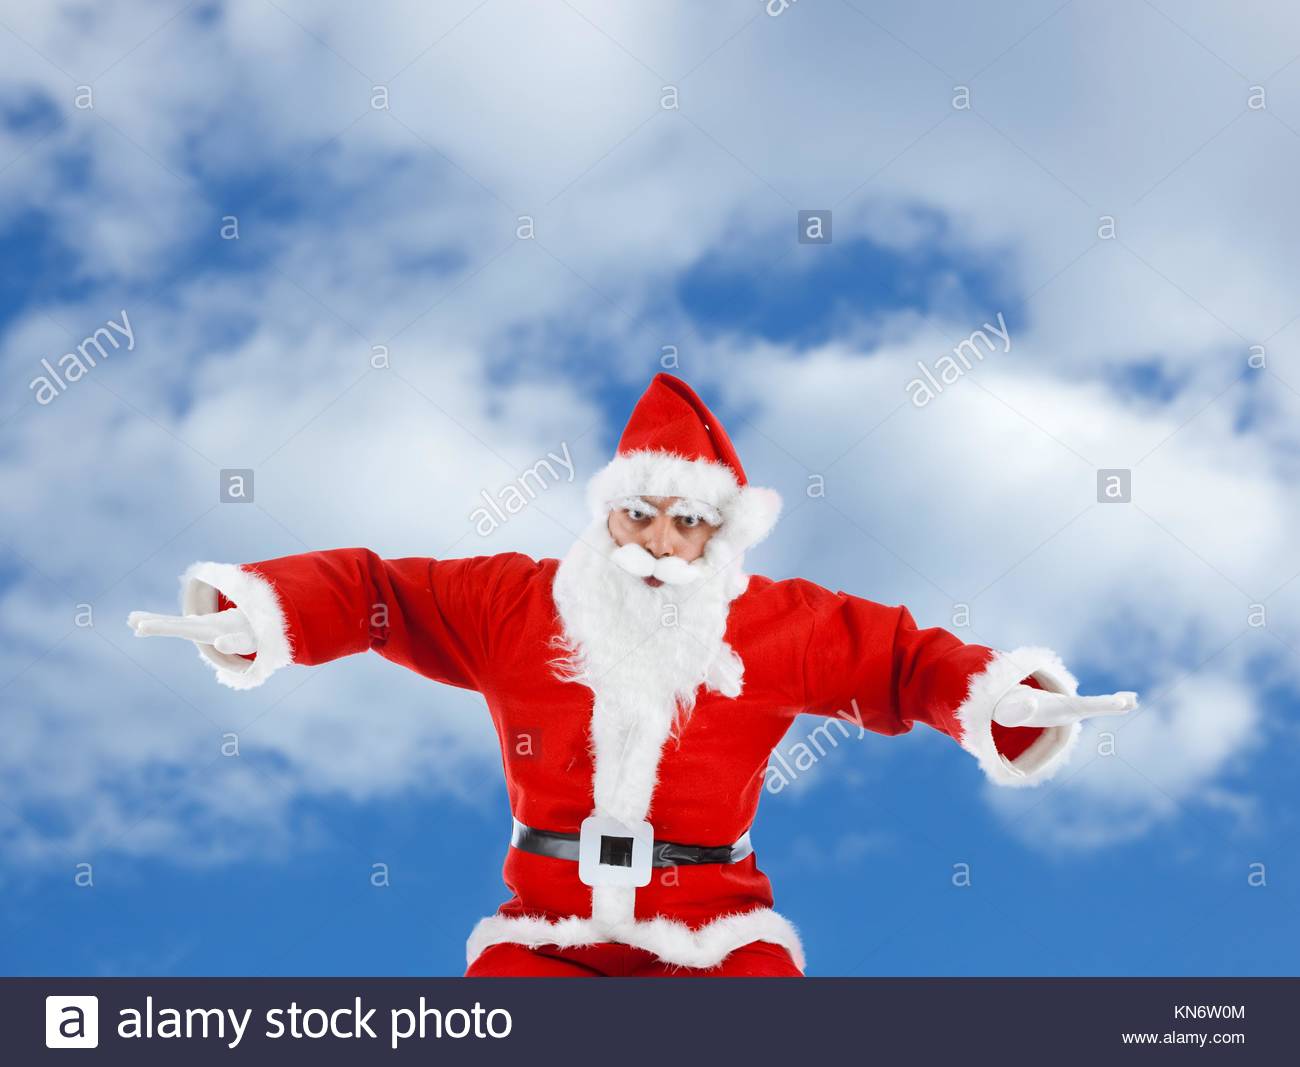 Santa Claus mimics a plane while flying in the sky Stock Image